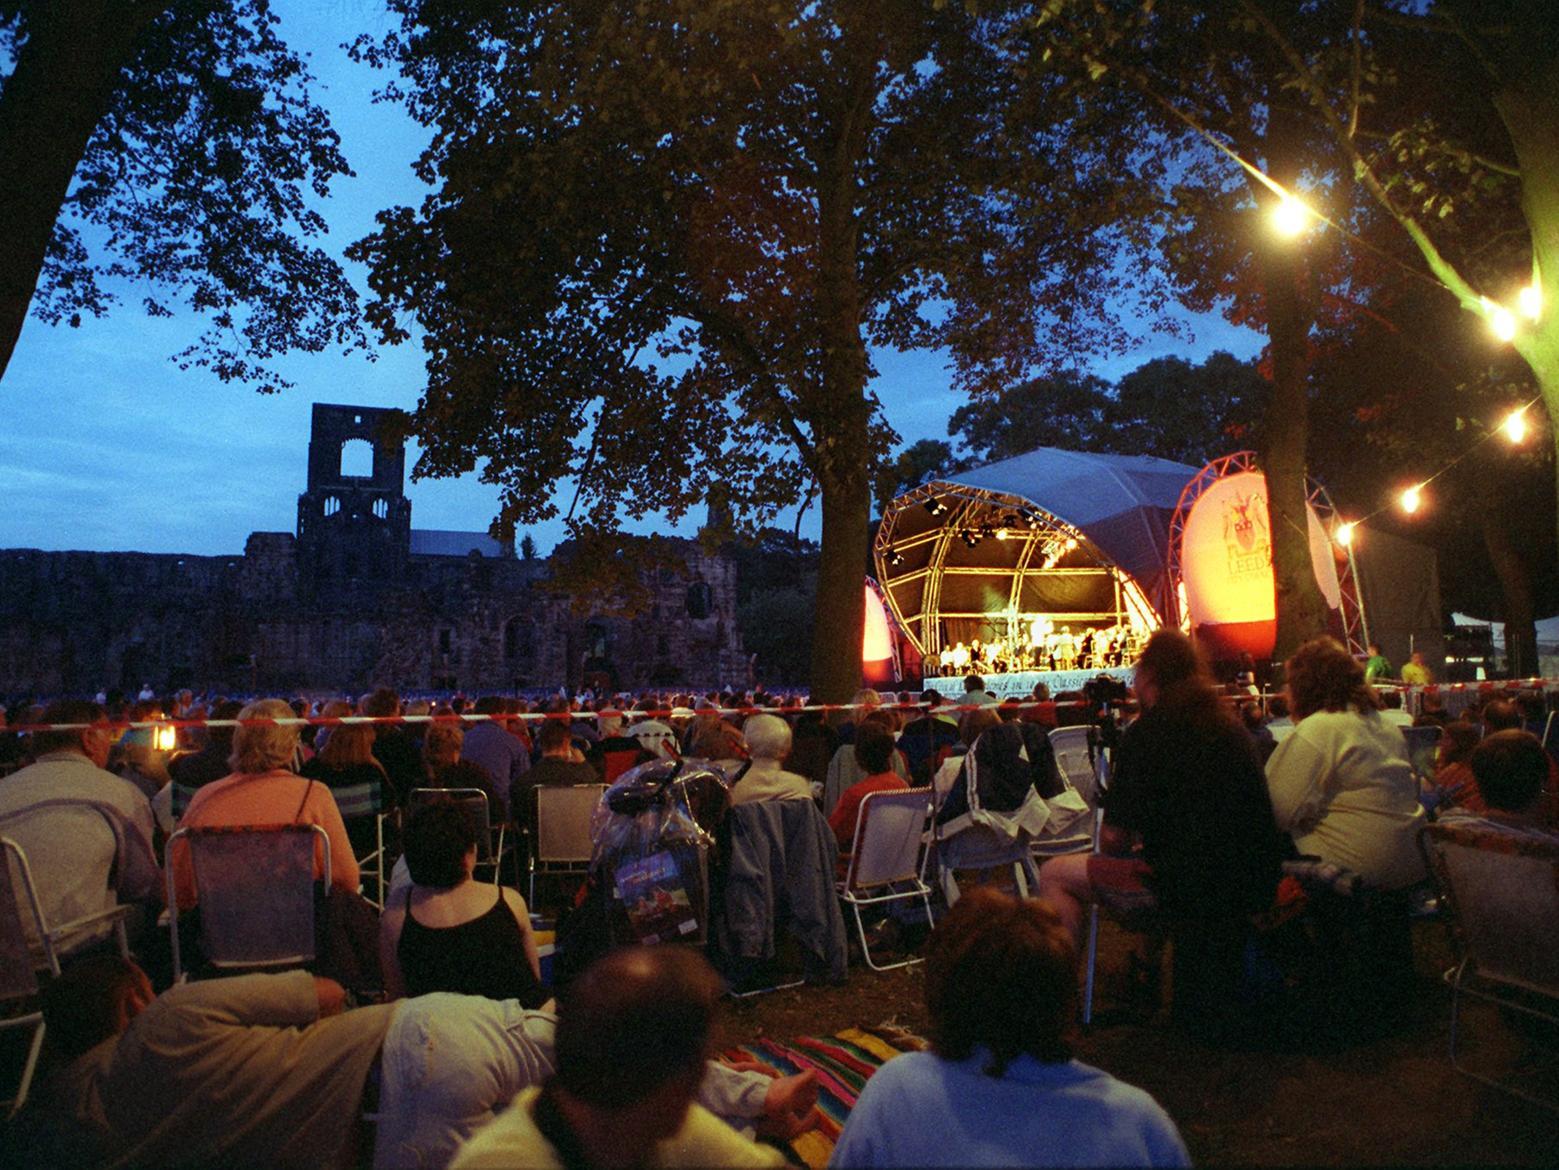 Kirkstall Abbey was the spectacular backdrop for this classical music concert held each year at the end of September. Axed in 2015.